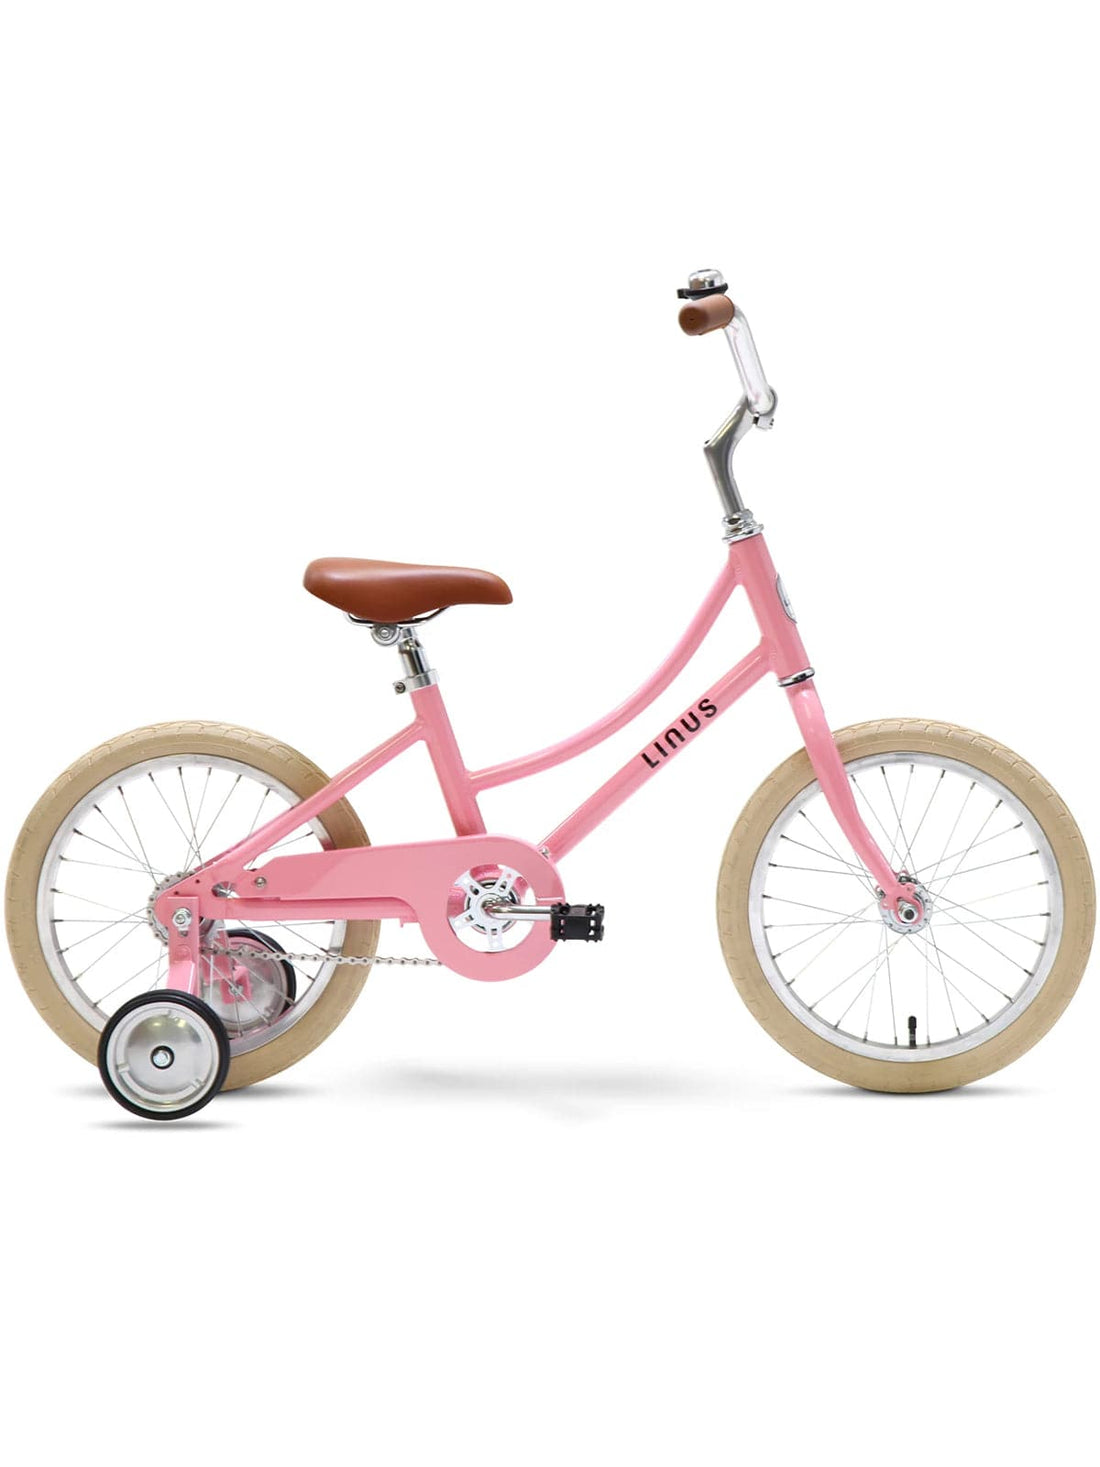 LIL DUTCHI 16", PINK WITH CREAM TIRES